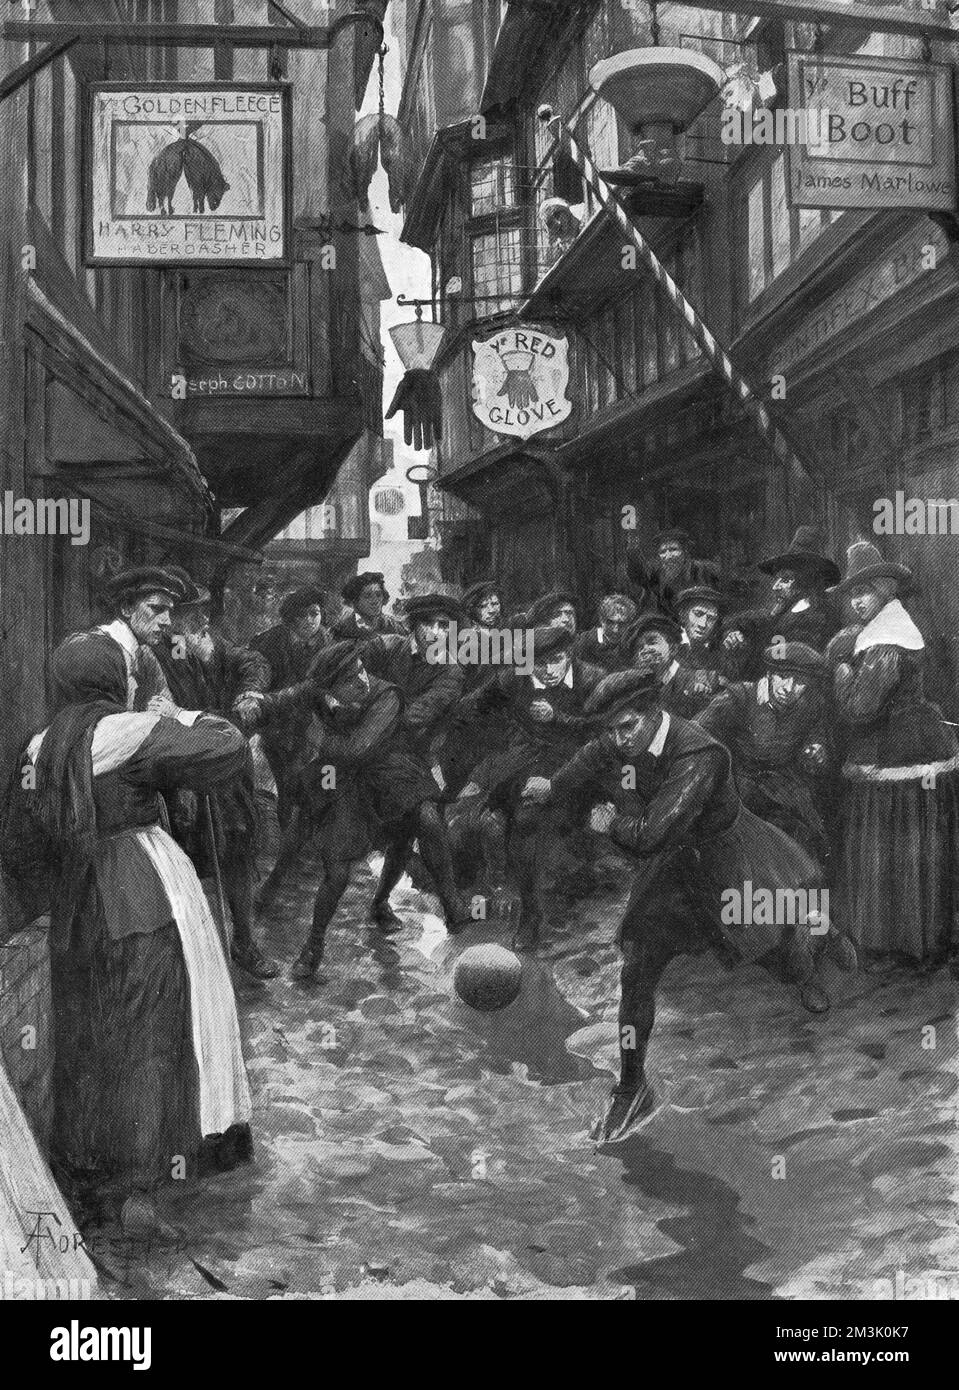 A game of football, played a group of apprentices, in the streets of London. Football, then a game with no rules, had been banned by Elizabeth I, but continued to be enjoyed until the time of Cromwell.     Date: 16th century Stock Photo